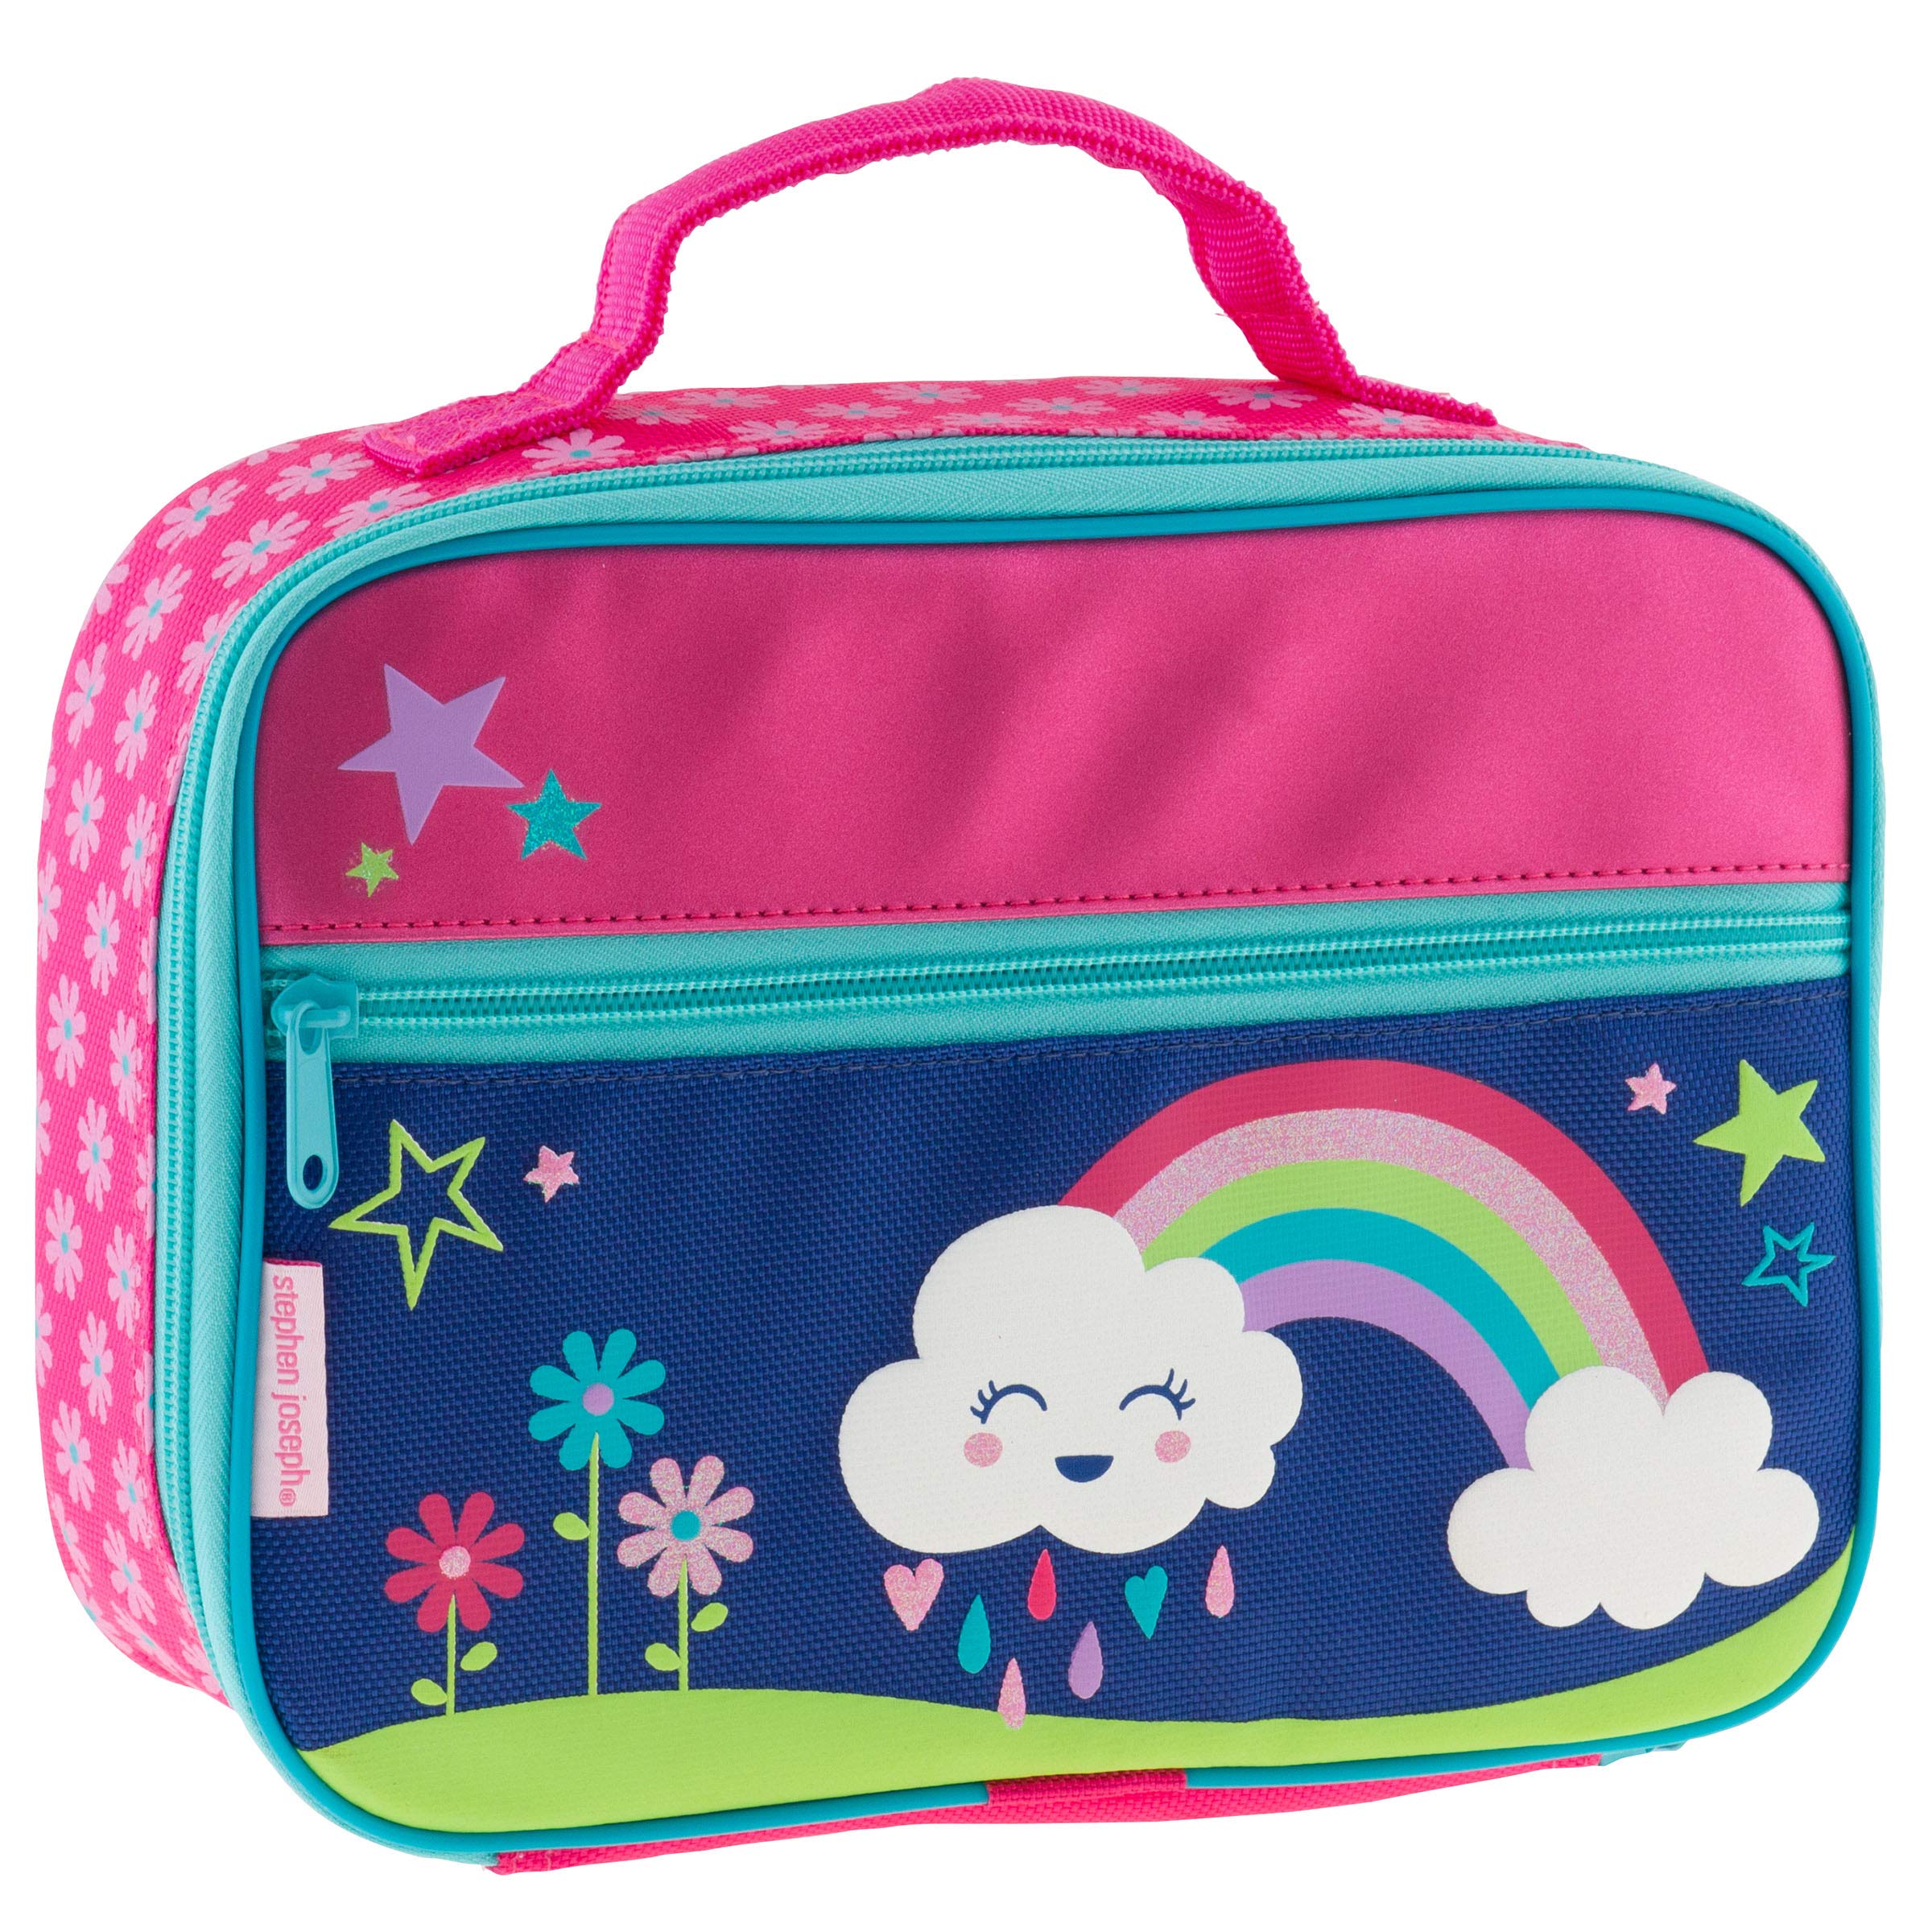 Personalized Classic Lunch Boxes - Rainbow